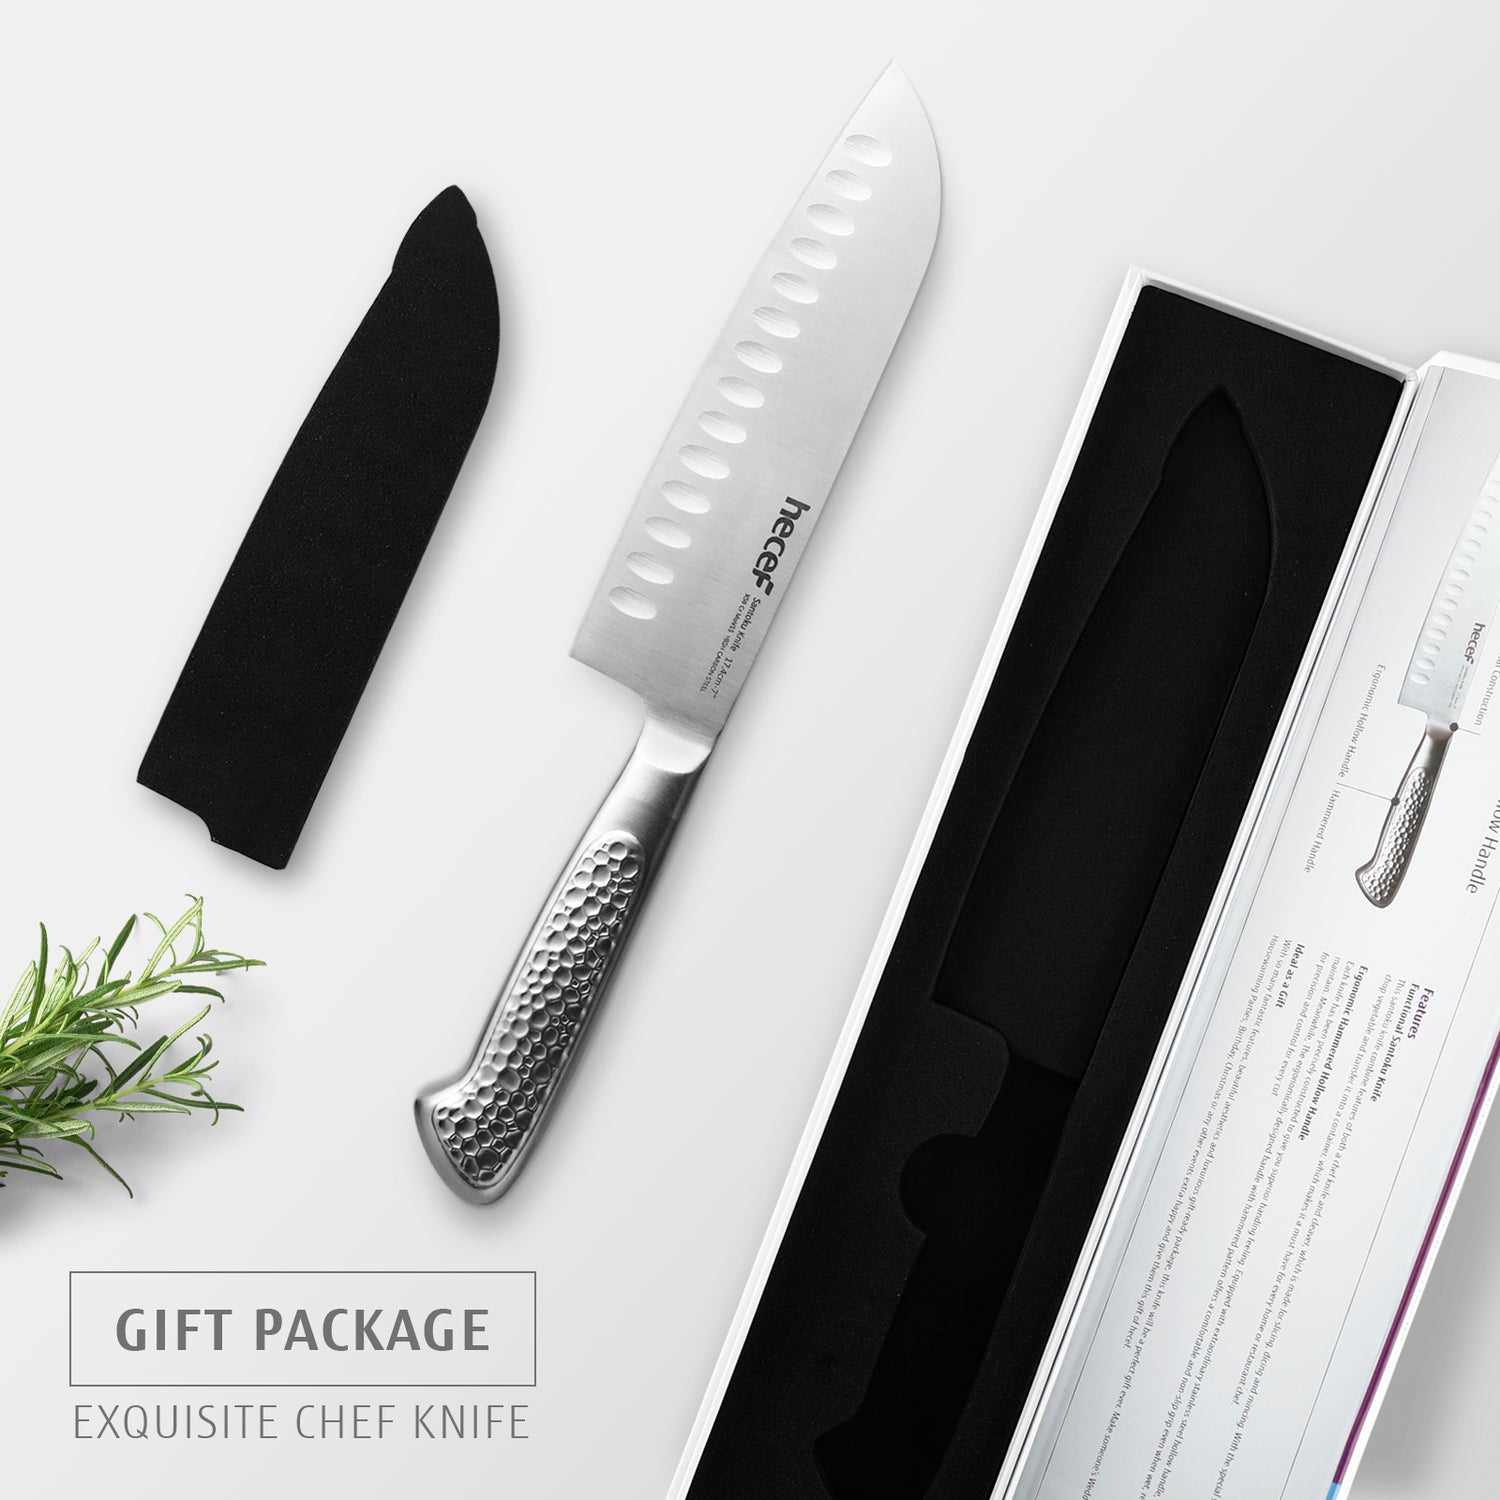 Hecef 6 Pcs Knife Set Black Oxide Japanese Chef Santoku Cooking Knife with Covers for Kitchen, Size: One Size